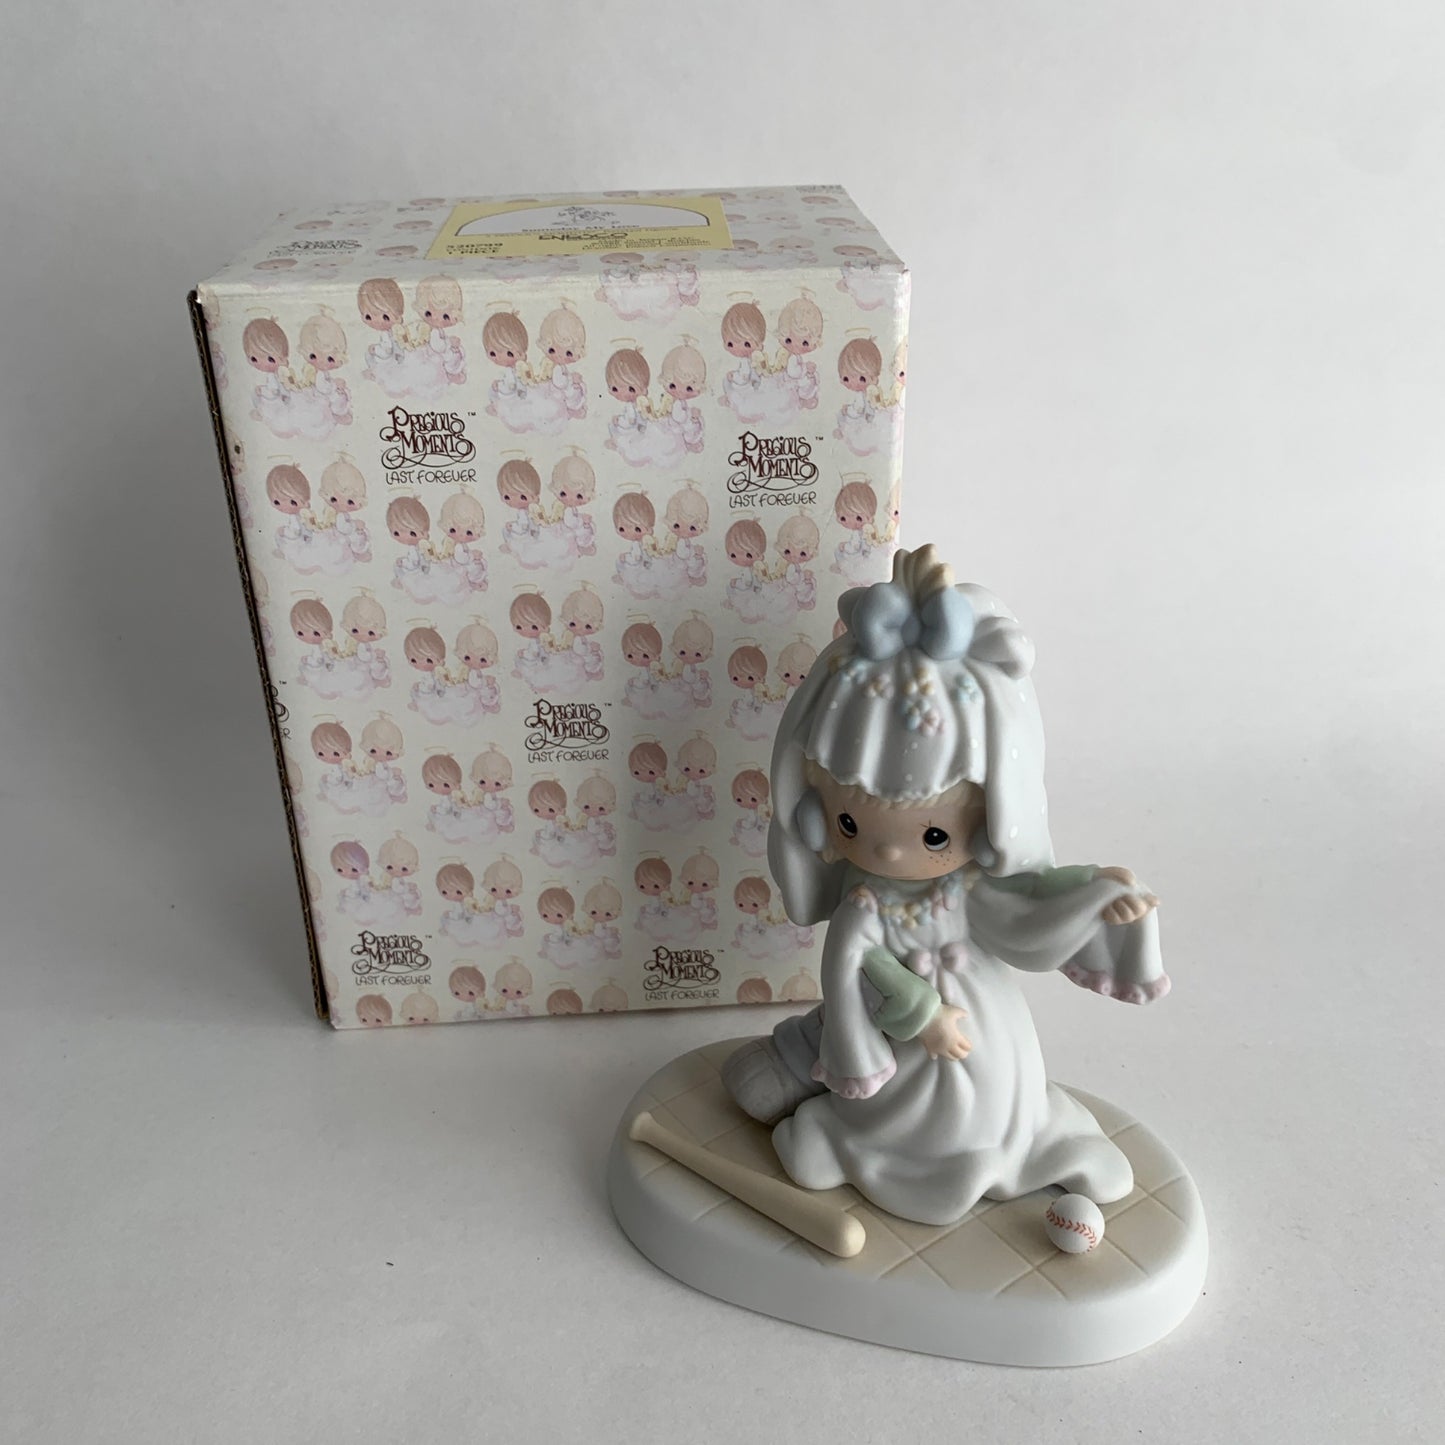 Precious Moments 520799 Figurine Someday My Love with Box